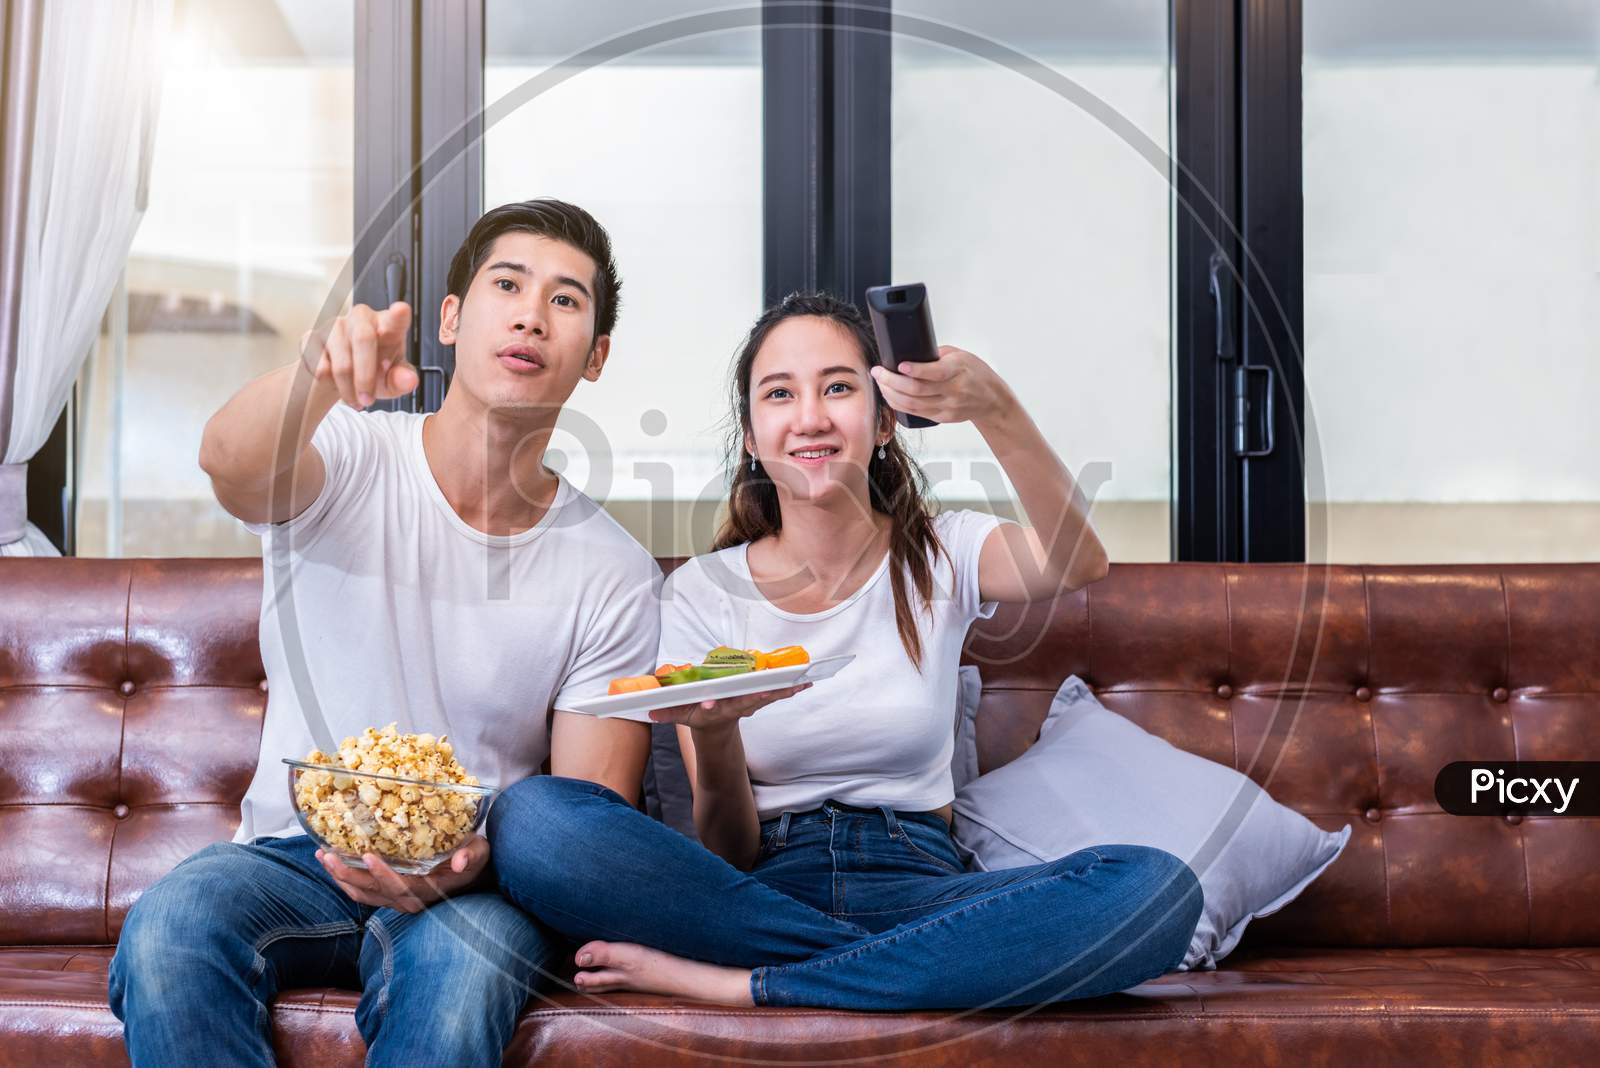 Asian Couples Watching Television Together On Sofa In Their Home. People And Lifestyles Concept. Vacation And Holiday Concept. Honeymoon And Pre Wedding Theme. Happy Family Activity Theme